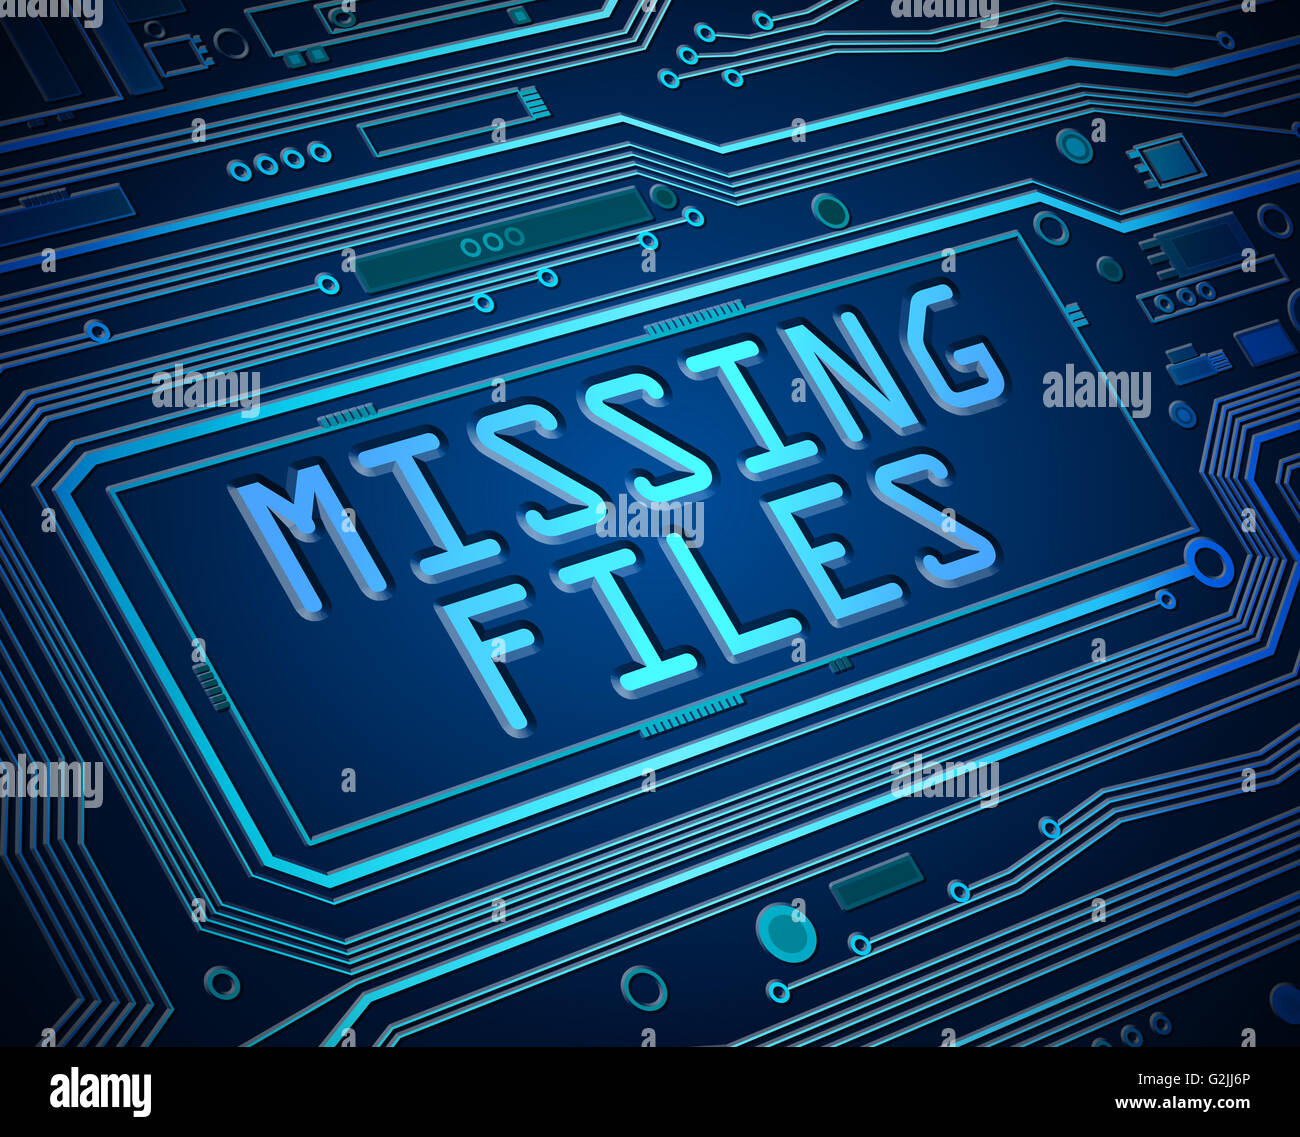 Missing files concept. Stock Photo